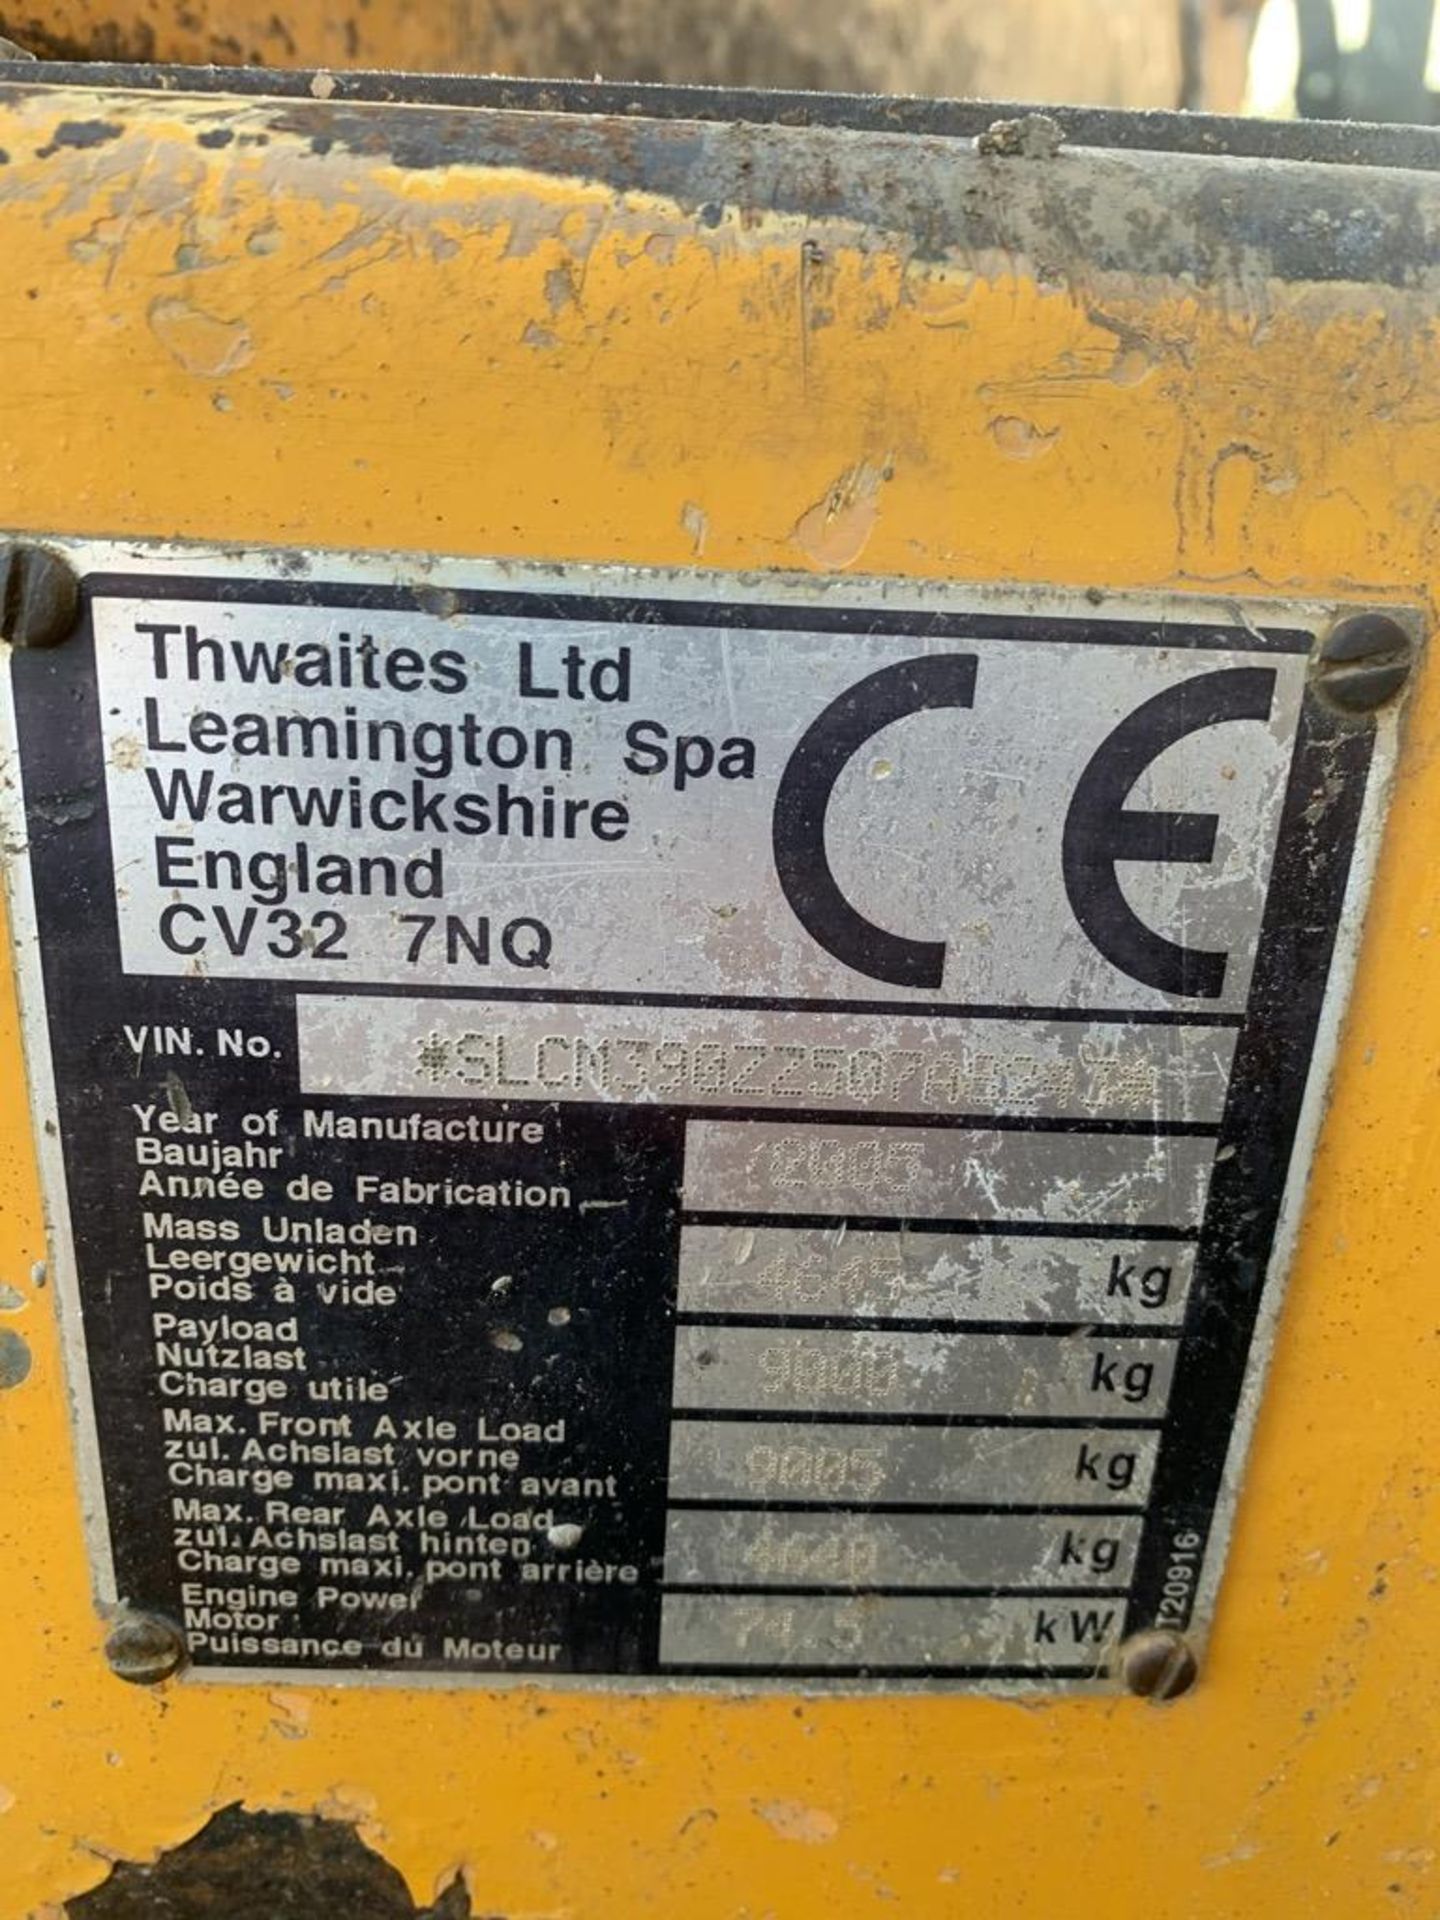 Thwaites 9 Ton Dump Truck Registration No. Q387 CBB First Registered: 25/01/2011 3841 Recorded Hours - Image 4 of 5